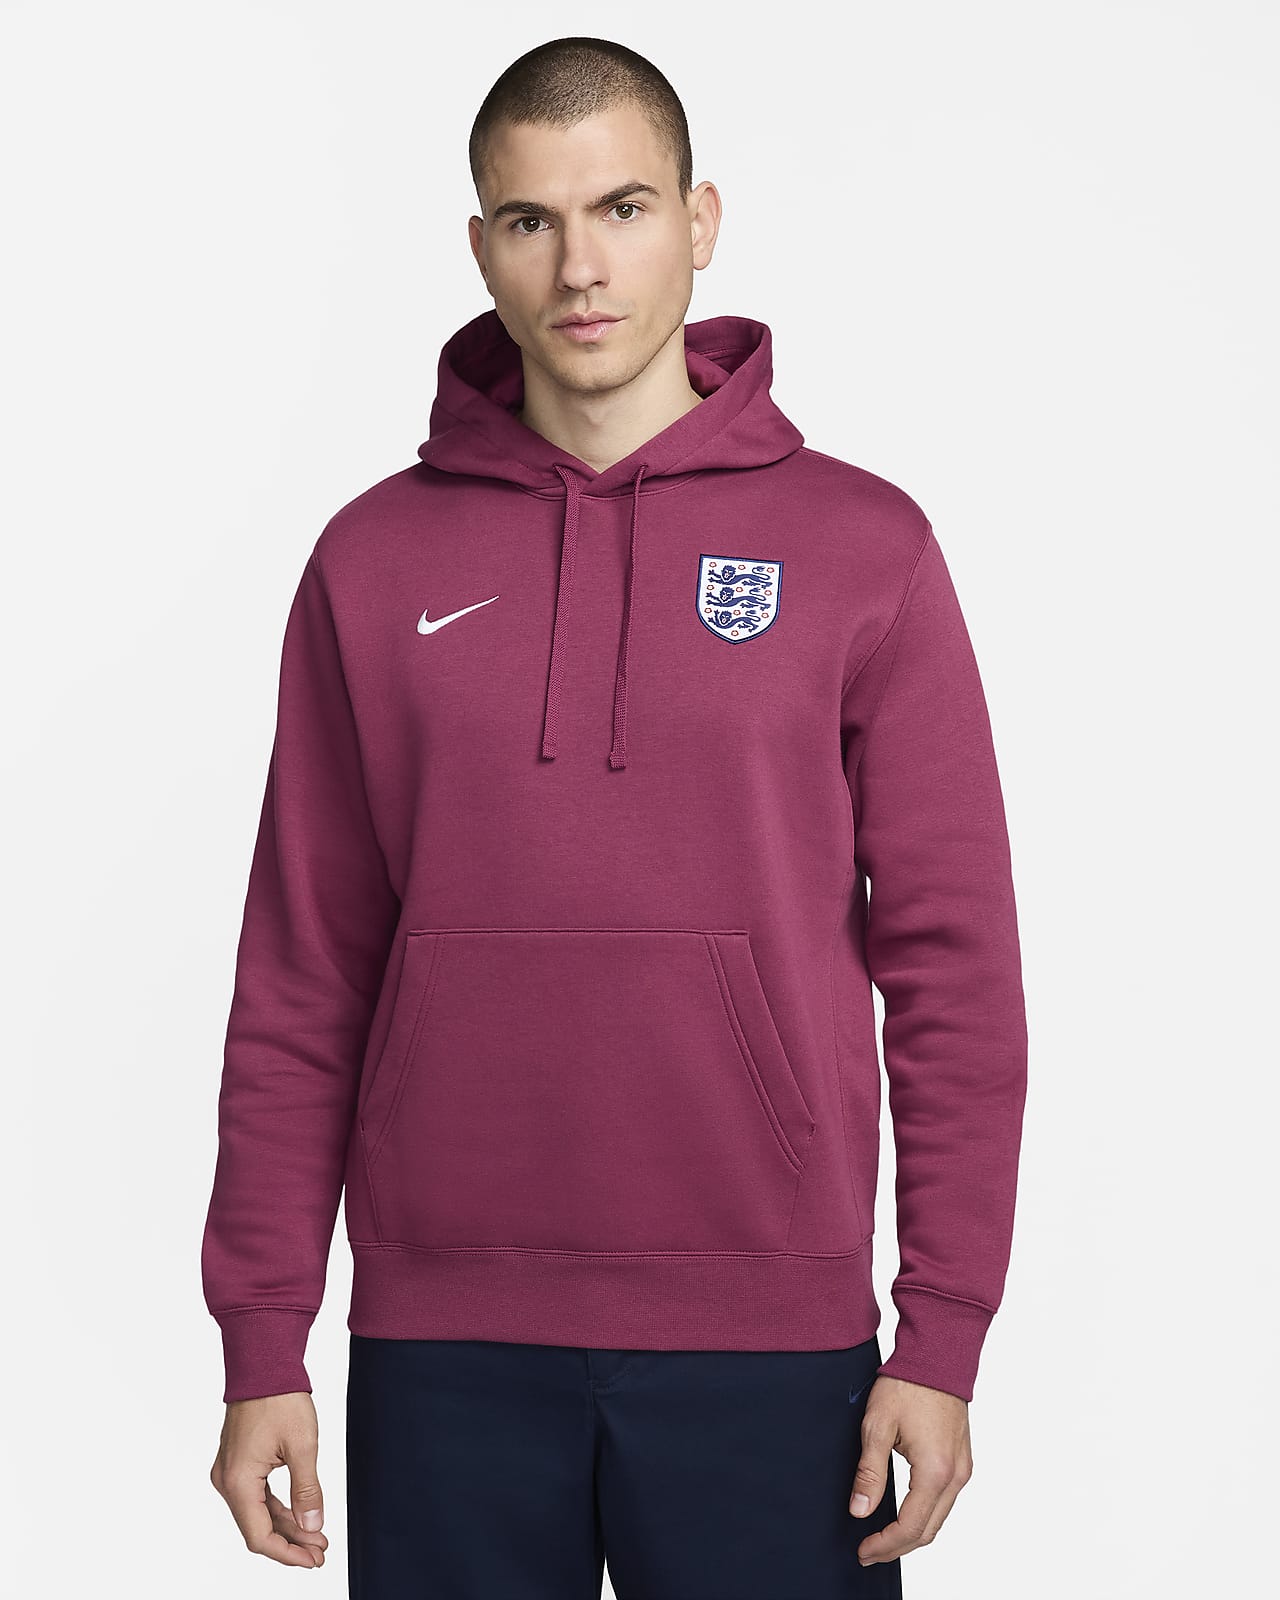 Sweat à capuche Nike Football Angleterre Club pour homme